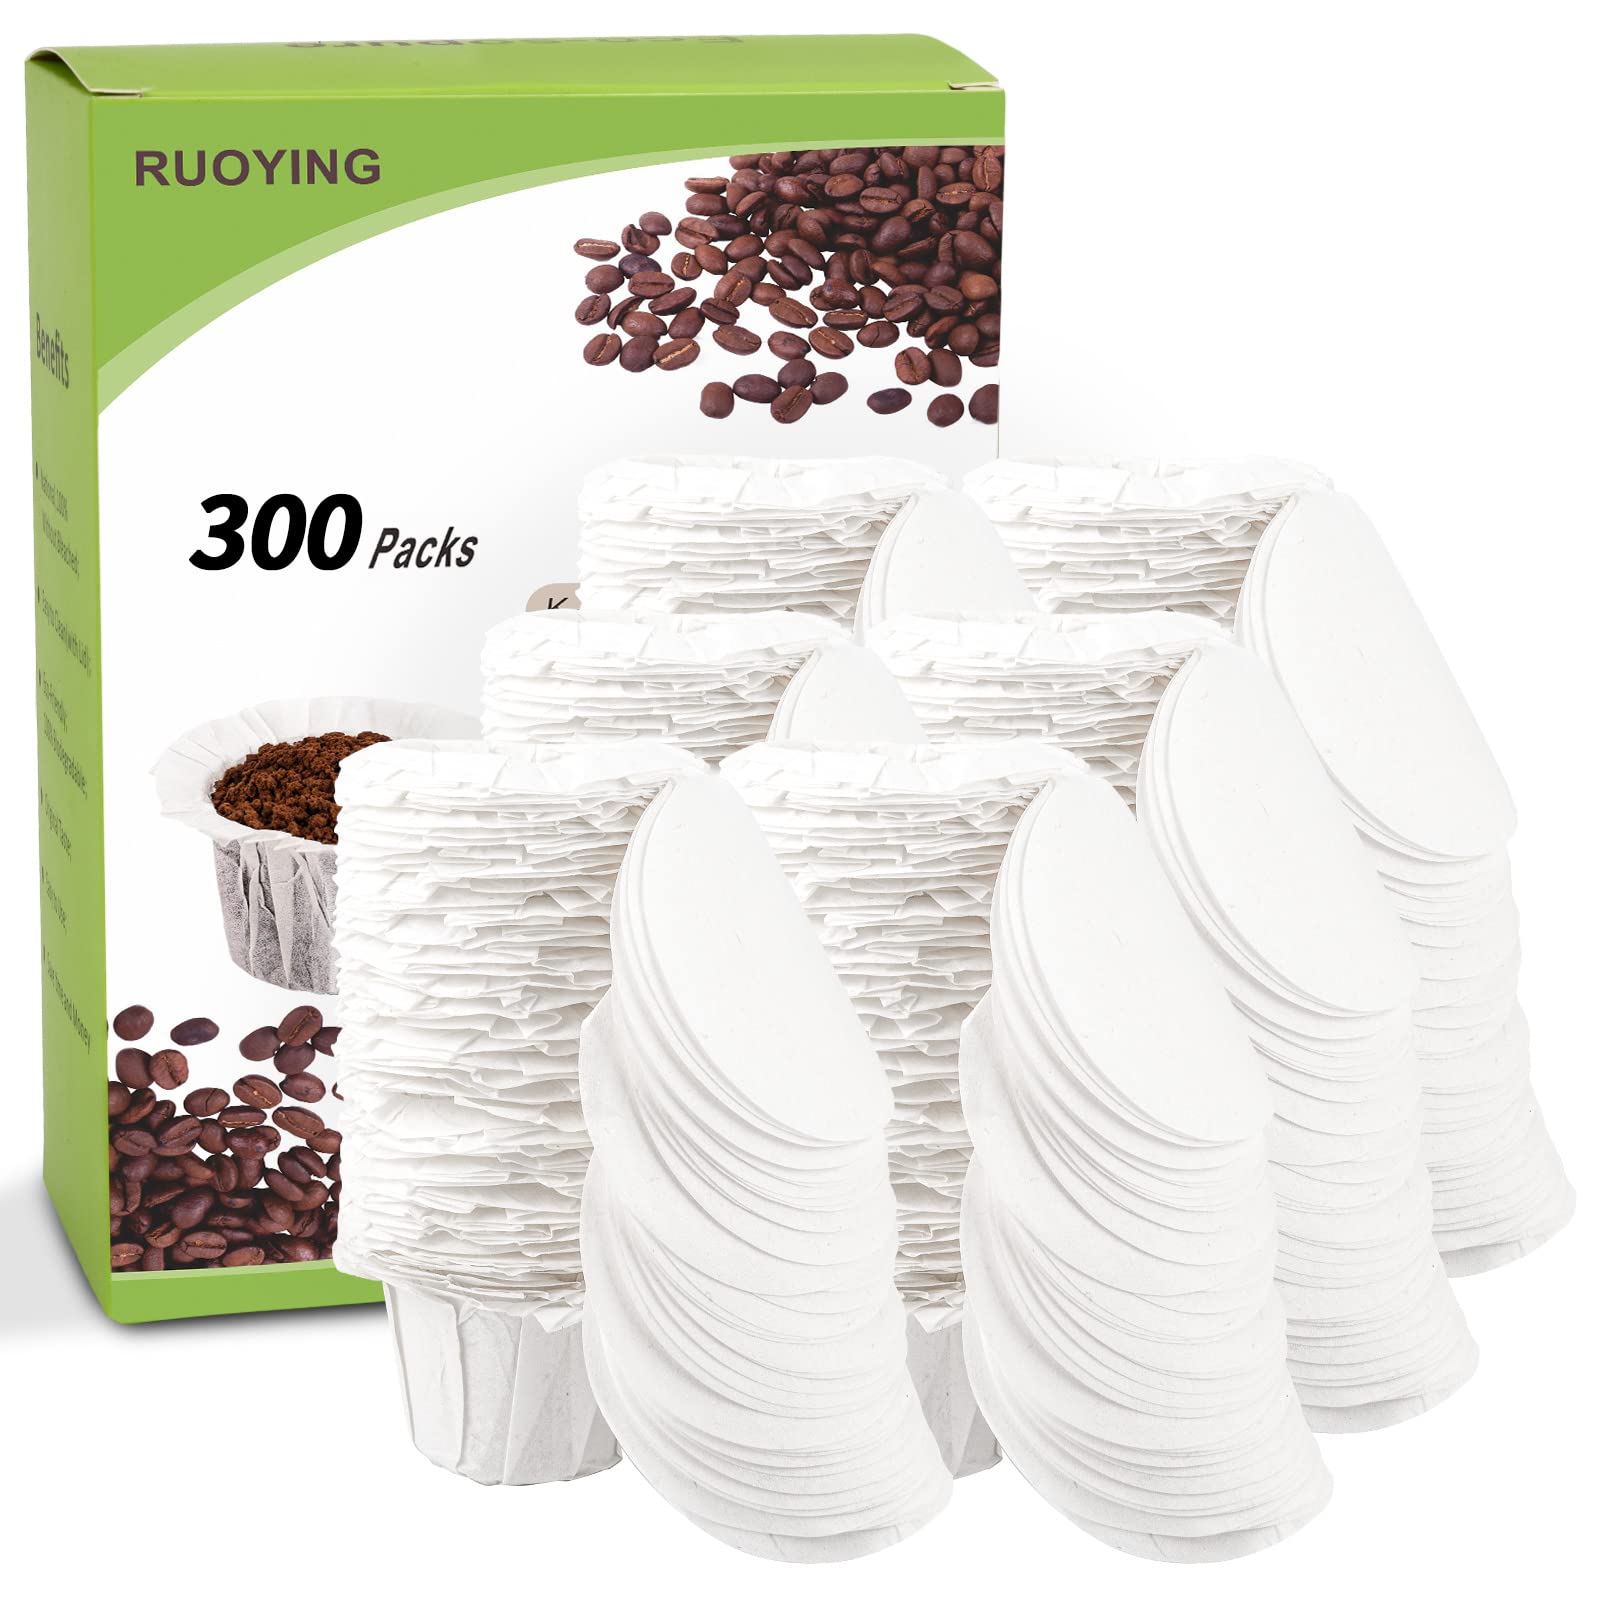 RUOYING K cup Coffee Paper Filters with Lid Disposable for Keurig Reusable K Cup Filters, Disposable Keurig K Cup Filters, Fits All Keur